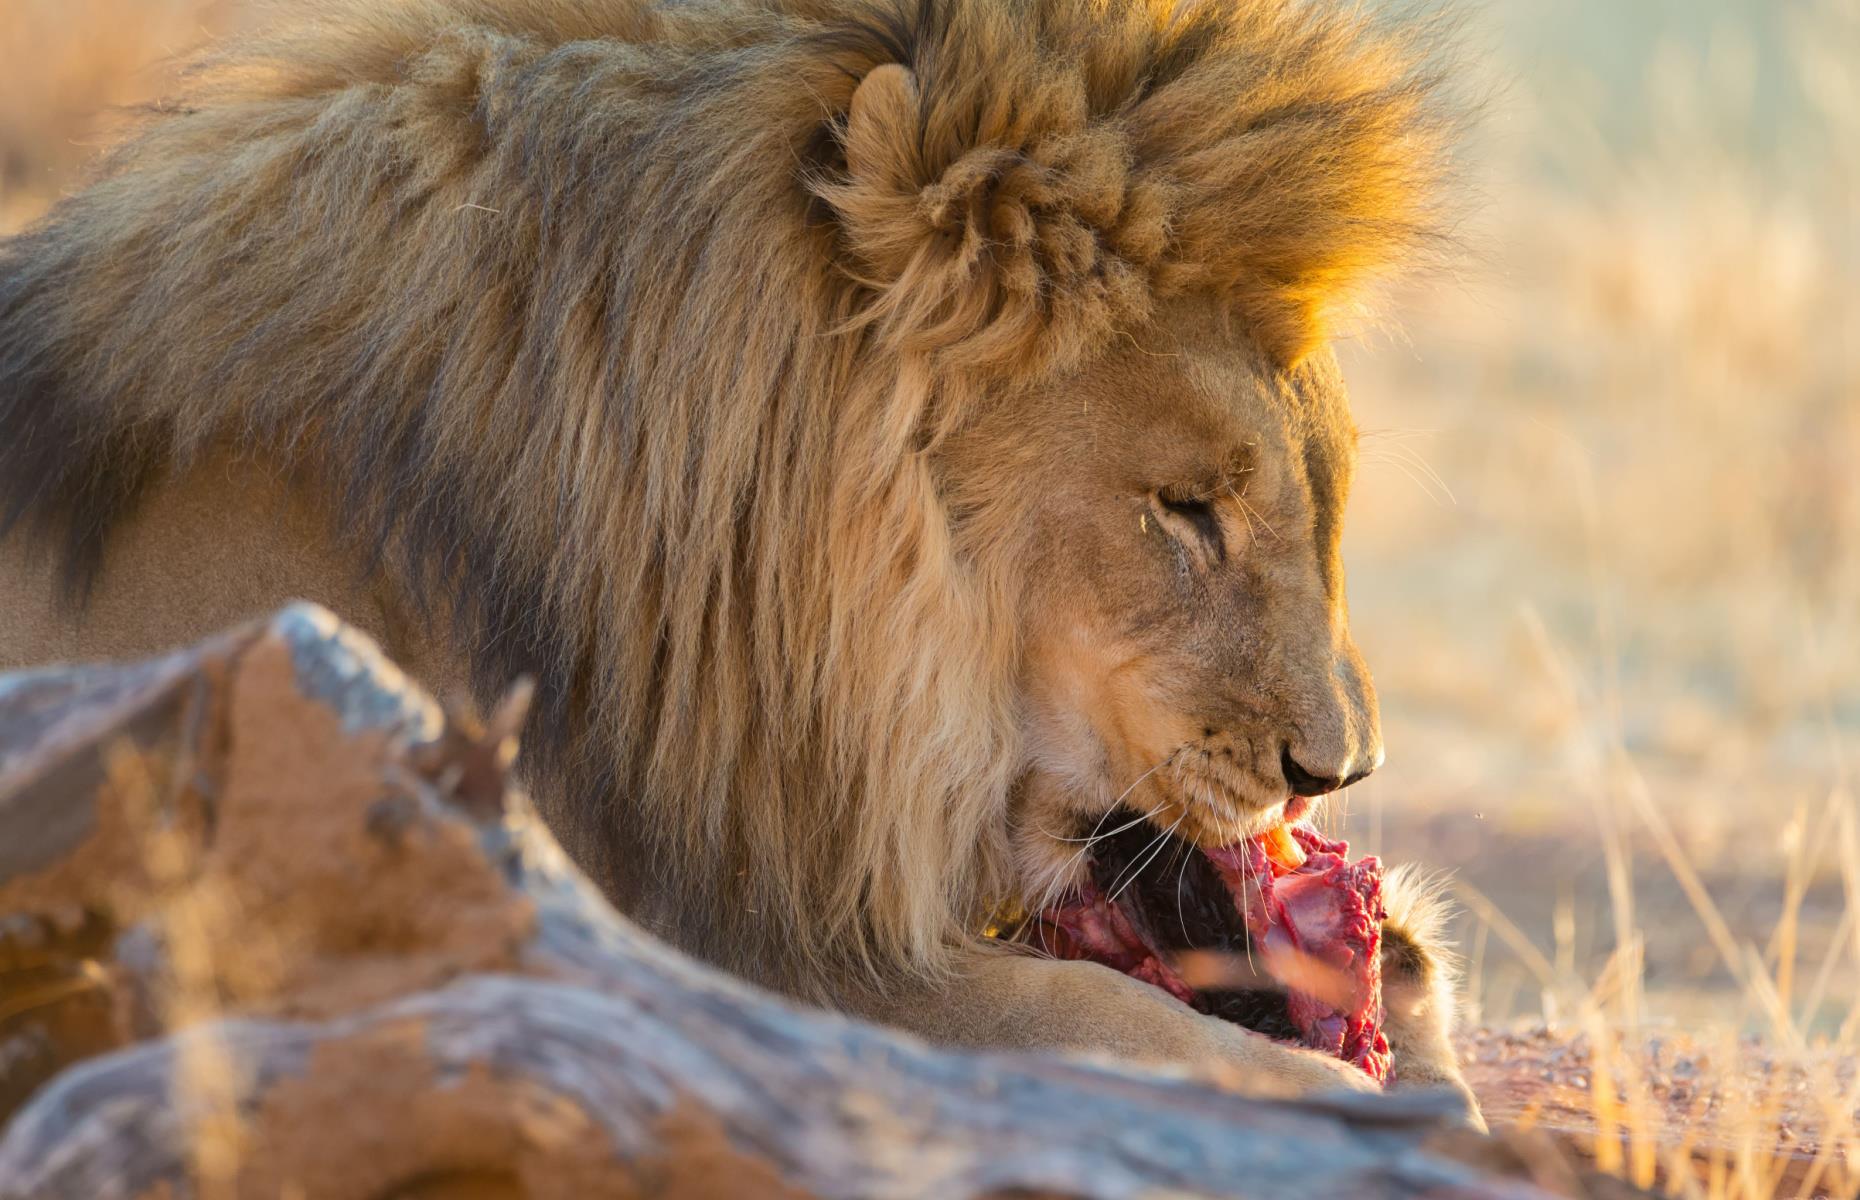 <p>The lion diet, now a massive TikTok trend, takes the carnivore diet a step further, allowing only red meat, salt and water. The elimination diet, which claims to help heal the gut, body and brain, was originally created by podcaster Mikhaila Fuller, who says following it has helped ease her many health problems. Experts warn against it, though, saying the diet lacks nutrients and fibre, is high in saturated fat, and could lead to health problems including high cholesterol and haemorrhoids.</p>  <p><a href="https://www.lovefood.com/galleries/103998/bad-dieting-advice-nutritionists-say-you-shouldnt-listen-to?page=1"><strong>Now discover the diet advice you should definitely ignore, according to experts</strong></a></p>